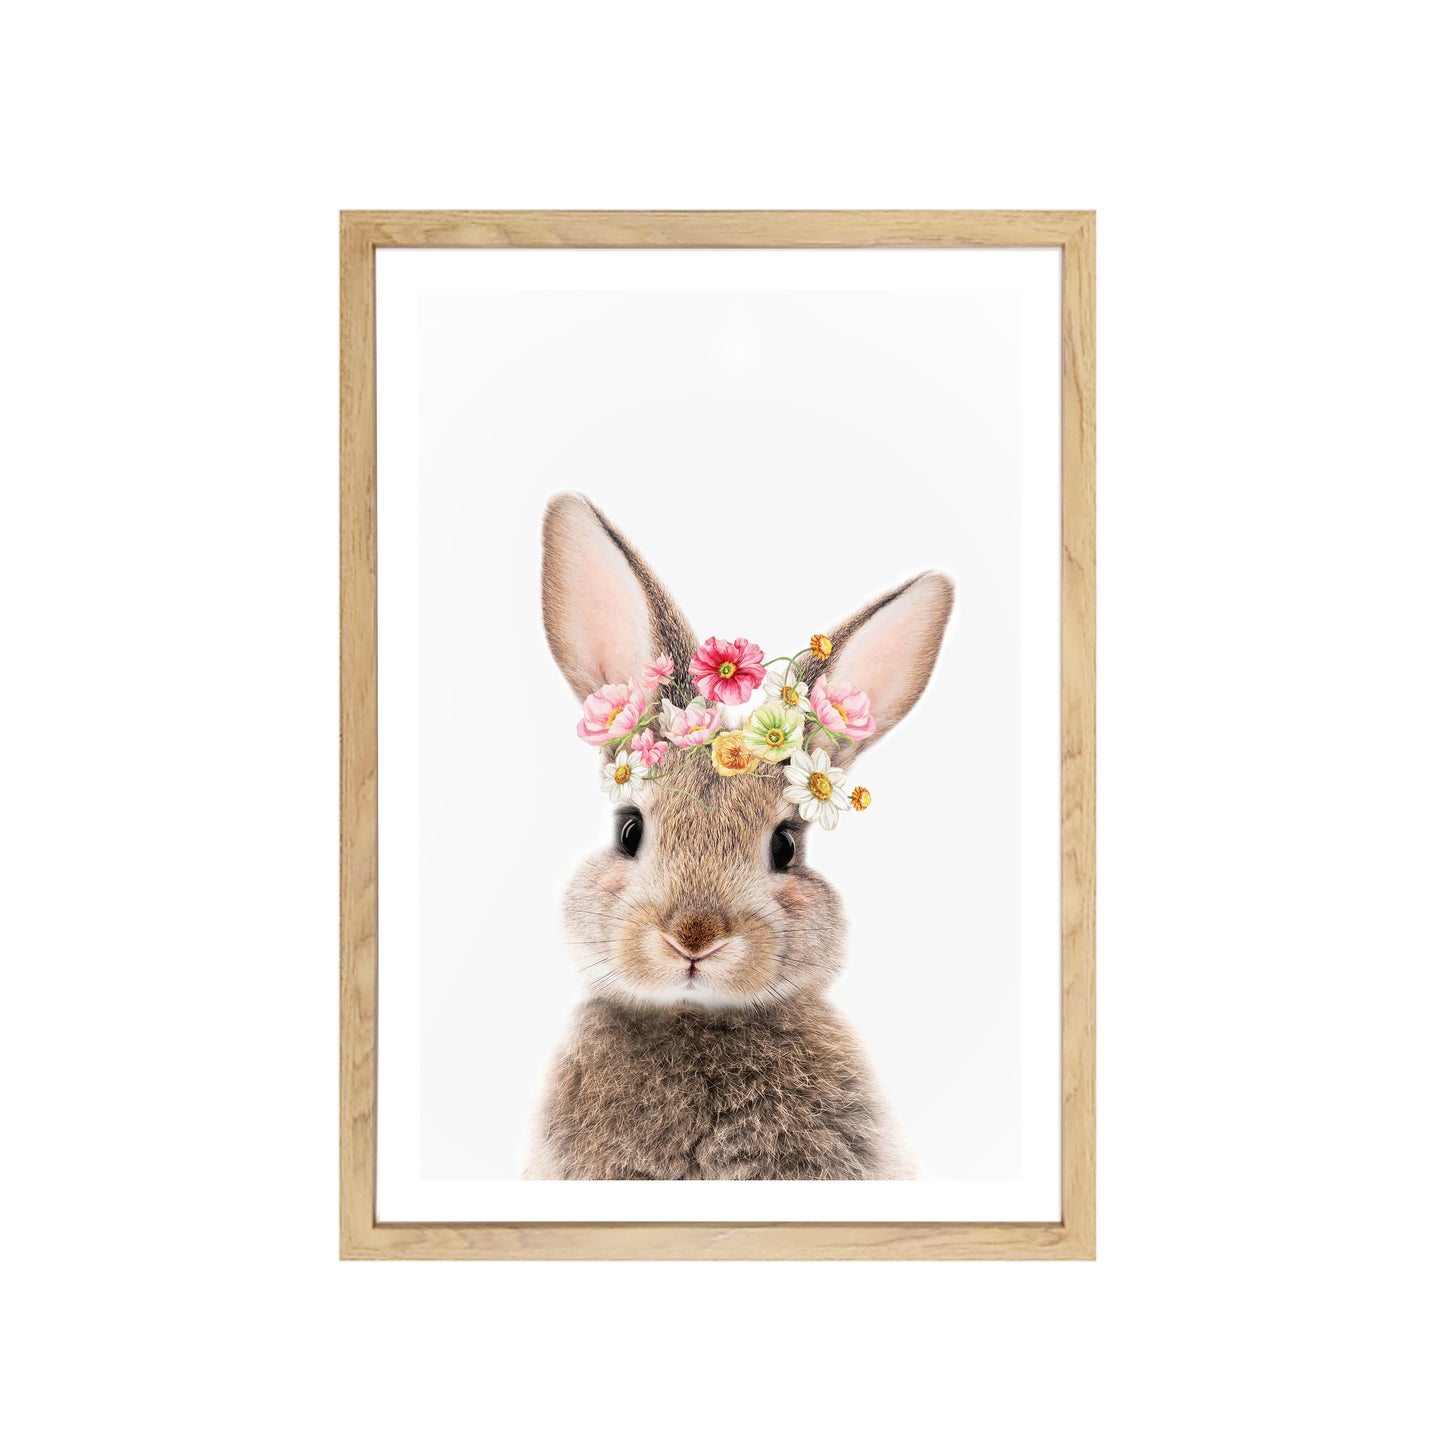 Baby Bunny Rabbit with Floral Crown